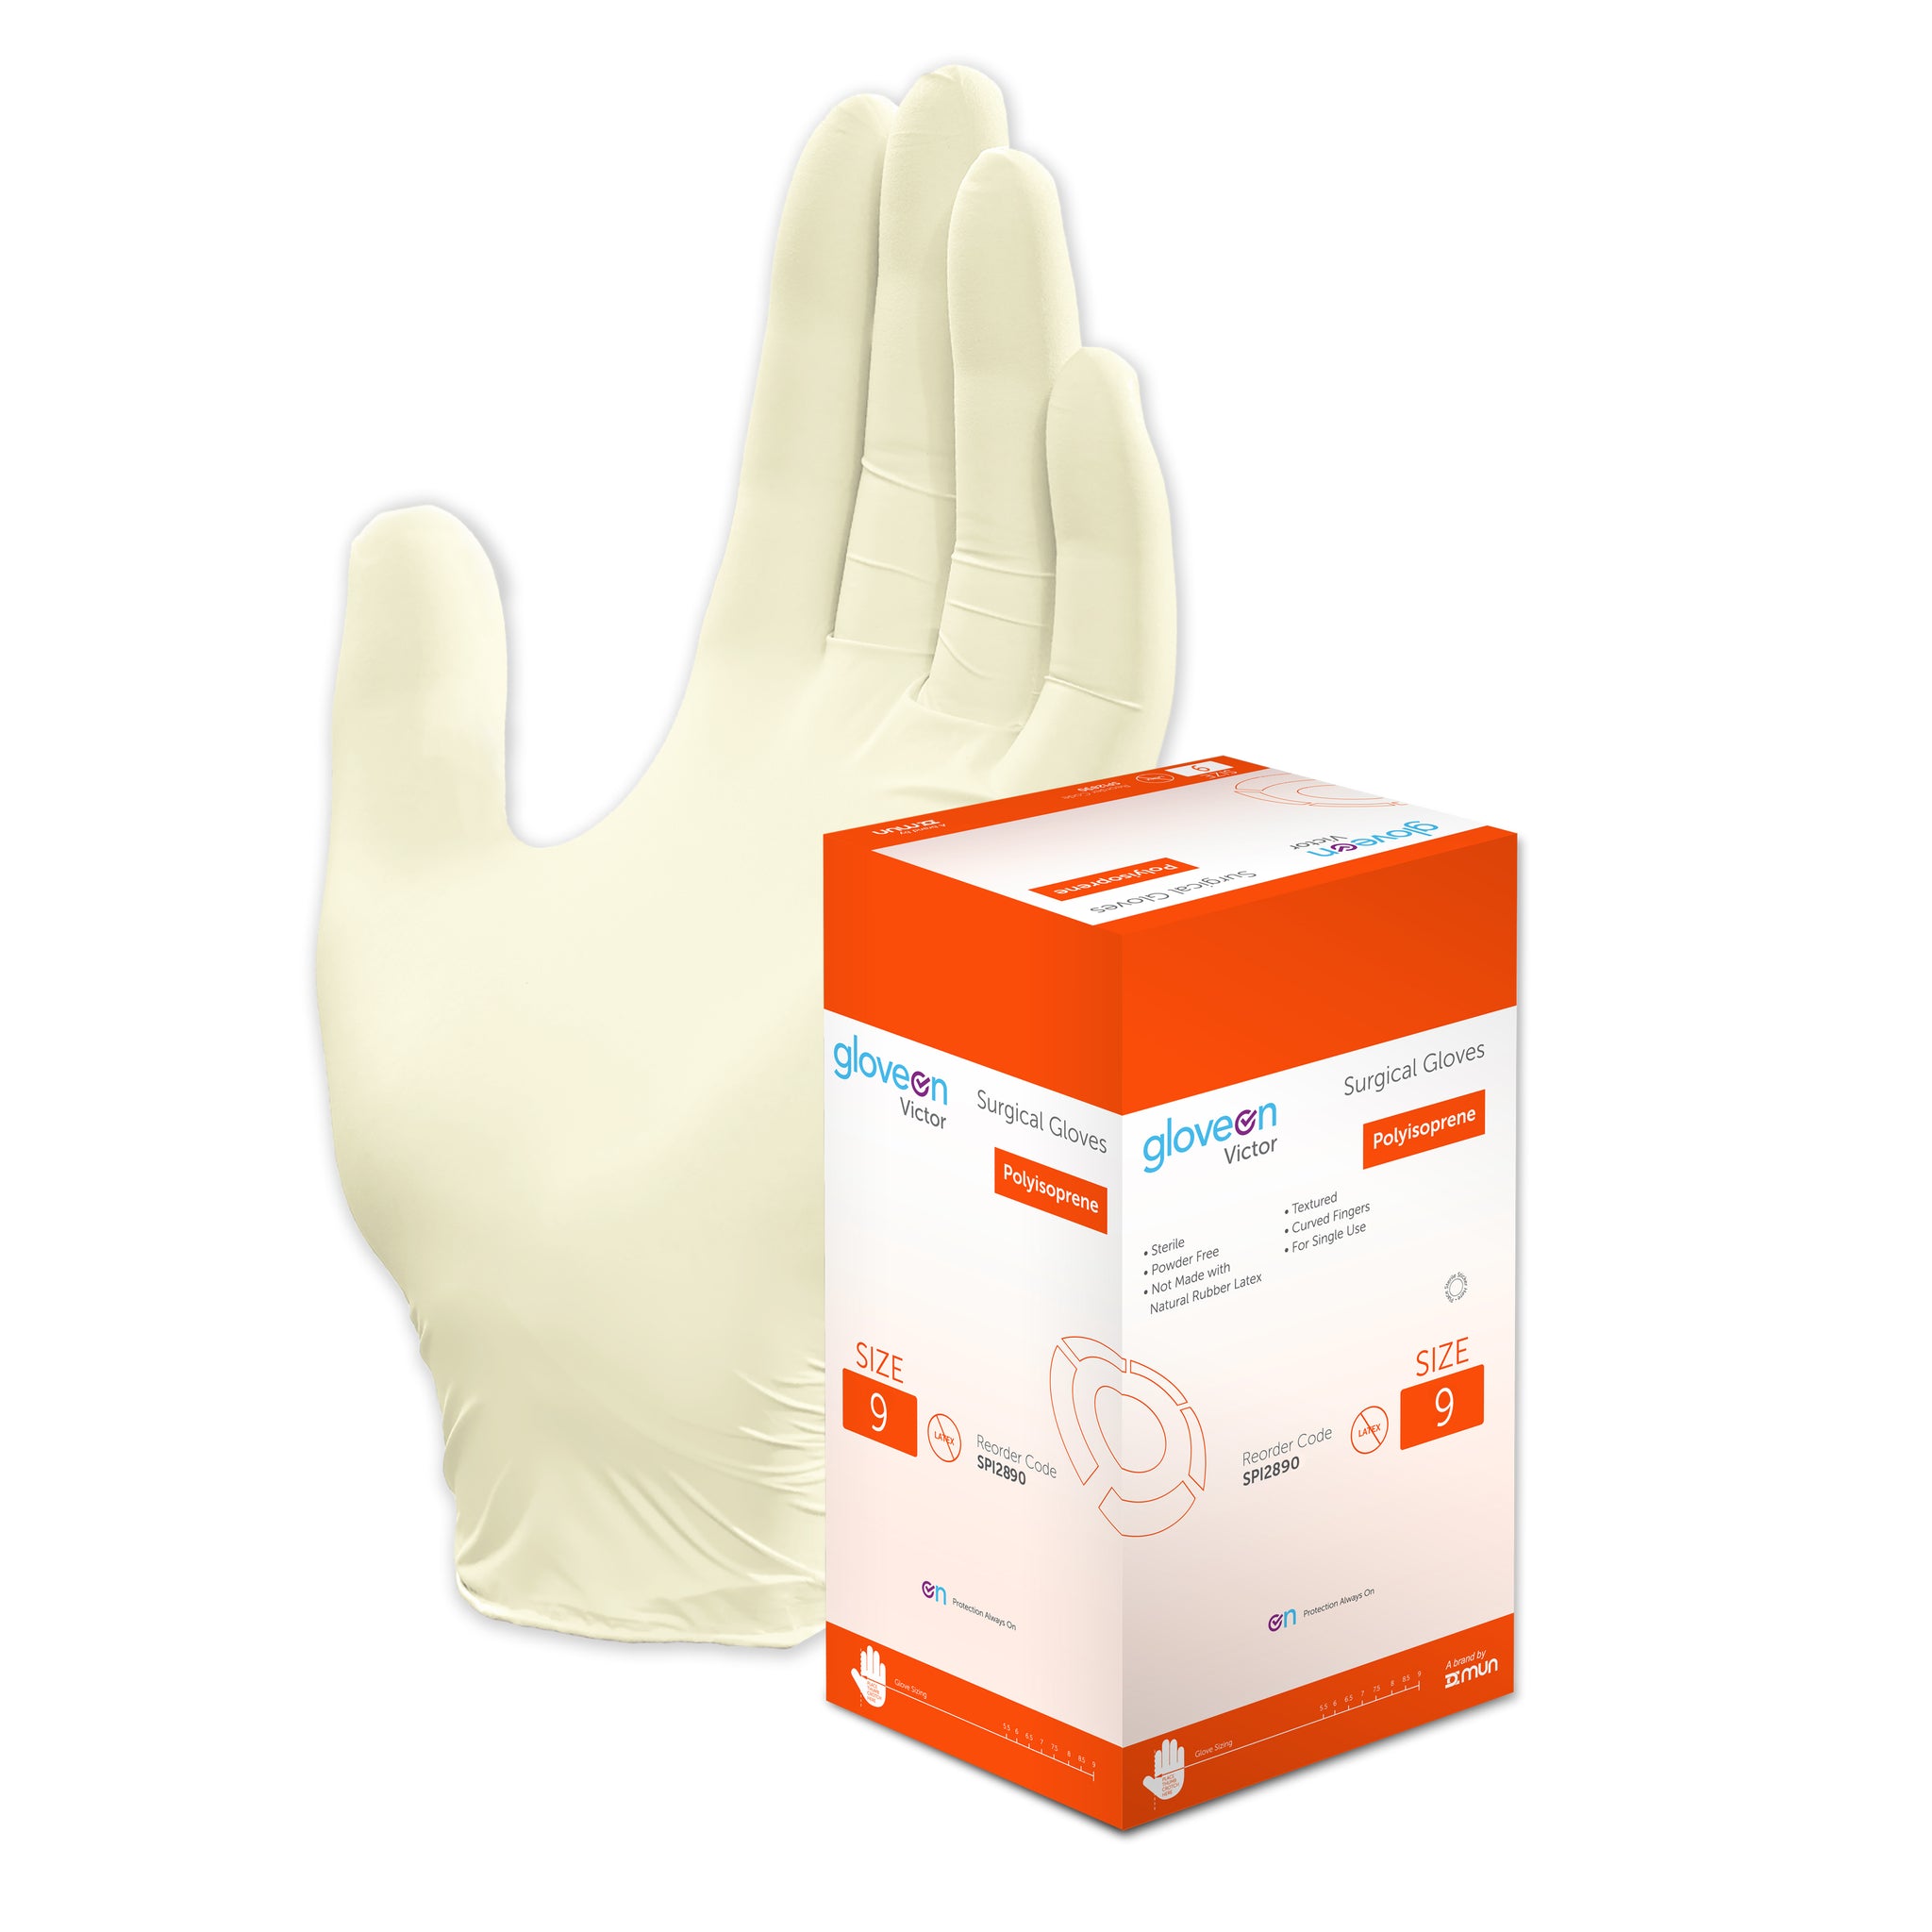 Polyisoprene, Powder Free, Textured, Curved Fingers, Sterile, White - Box of 100, 9